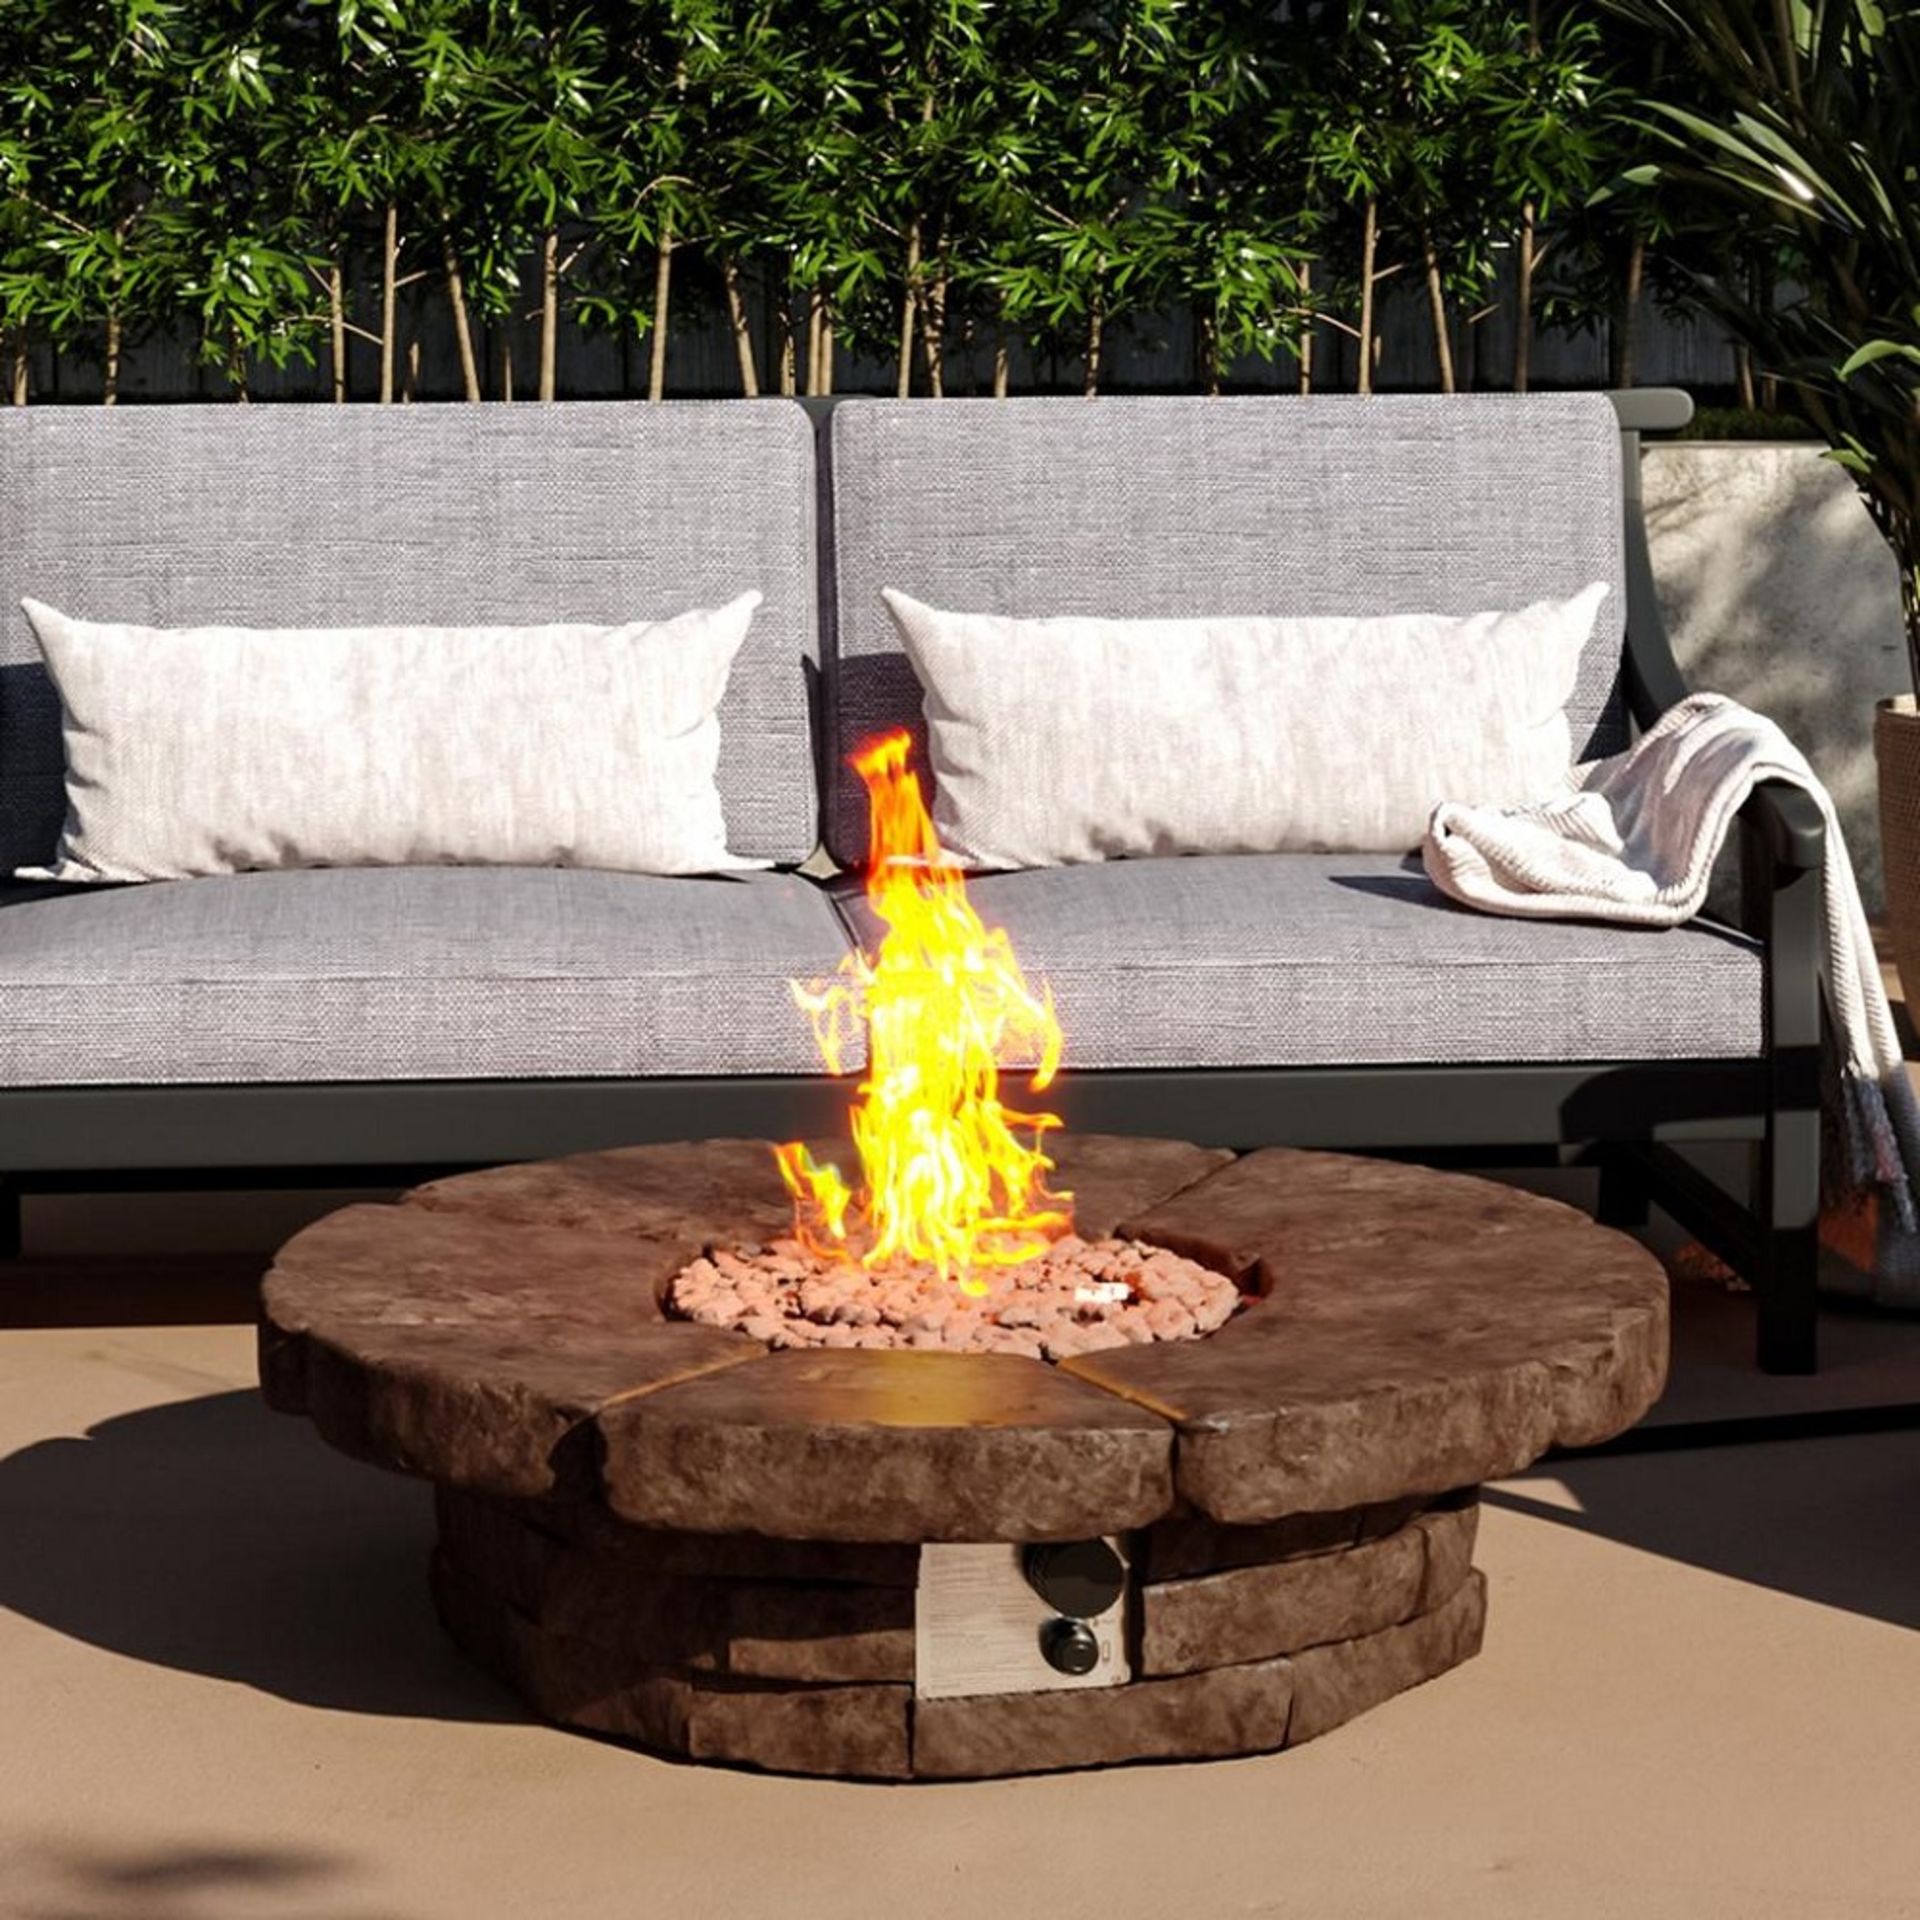 Brand New Large Round Gas Firepit Heater RRP £347 Stone Concrete Effect Outdoor Garden Patio Heater - Image 7 of 7